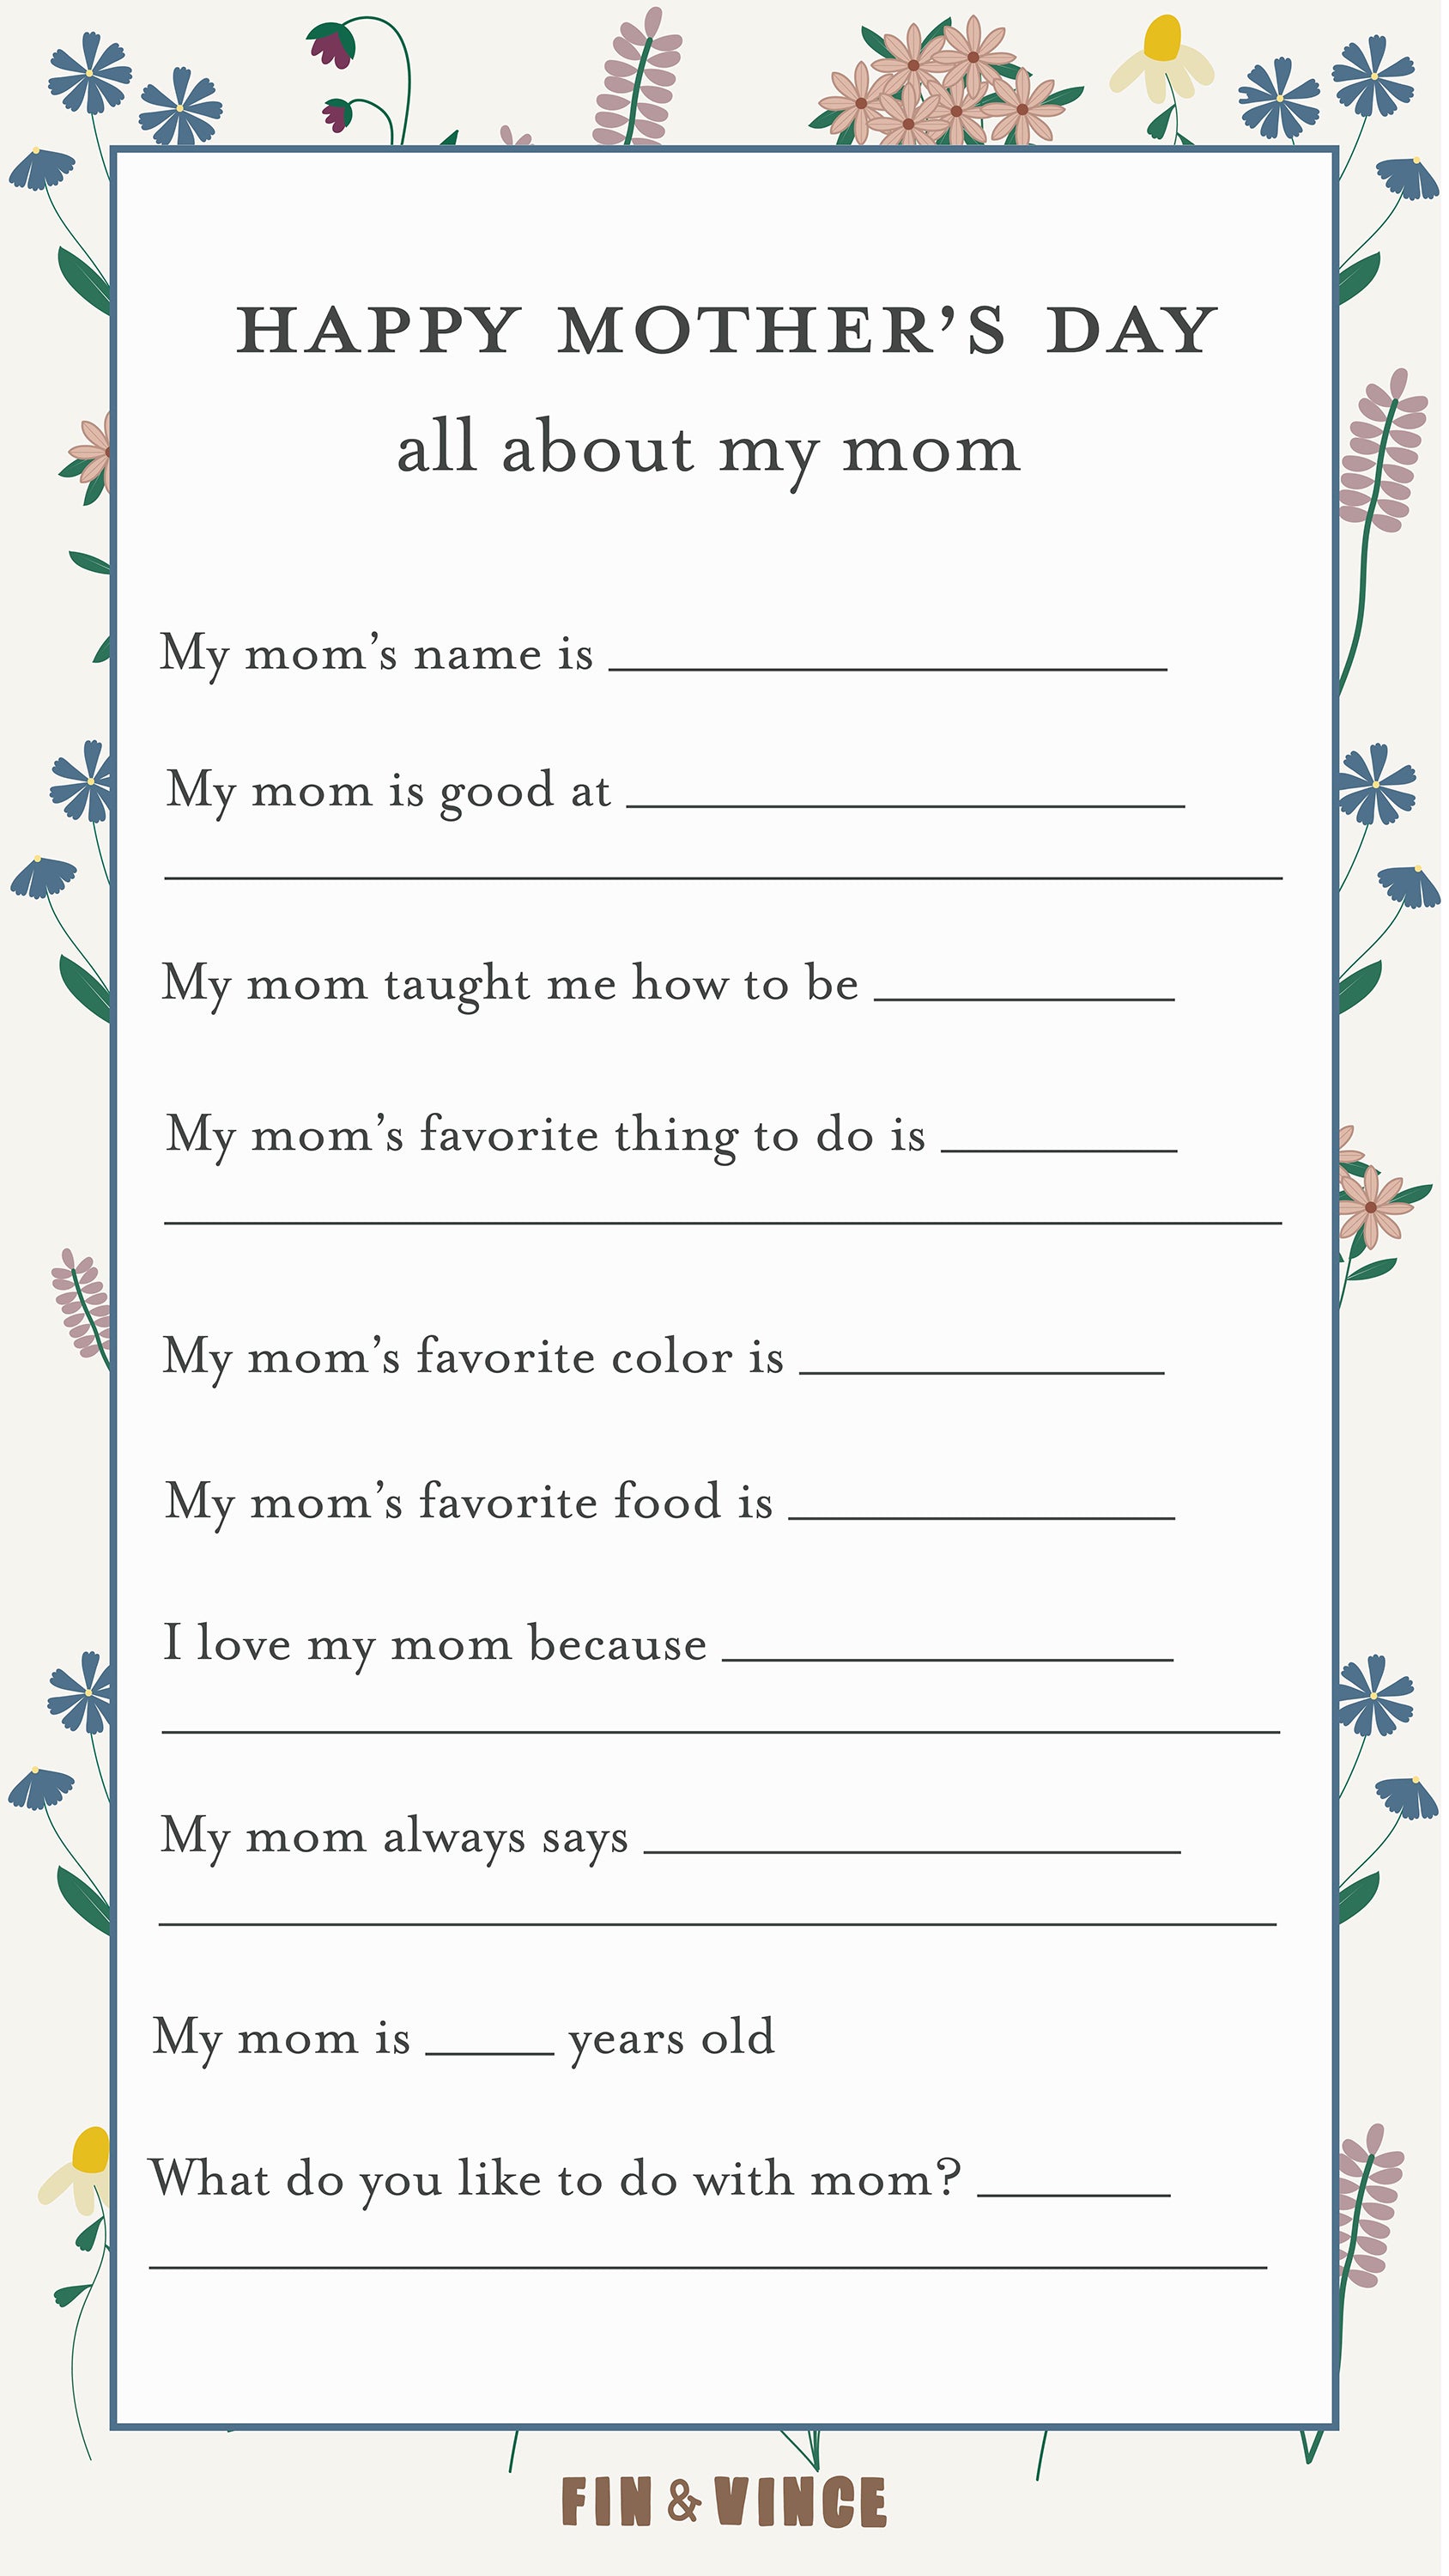 Mothers Day Questionnaire Free Printable Fin And Vince 